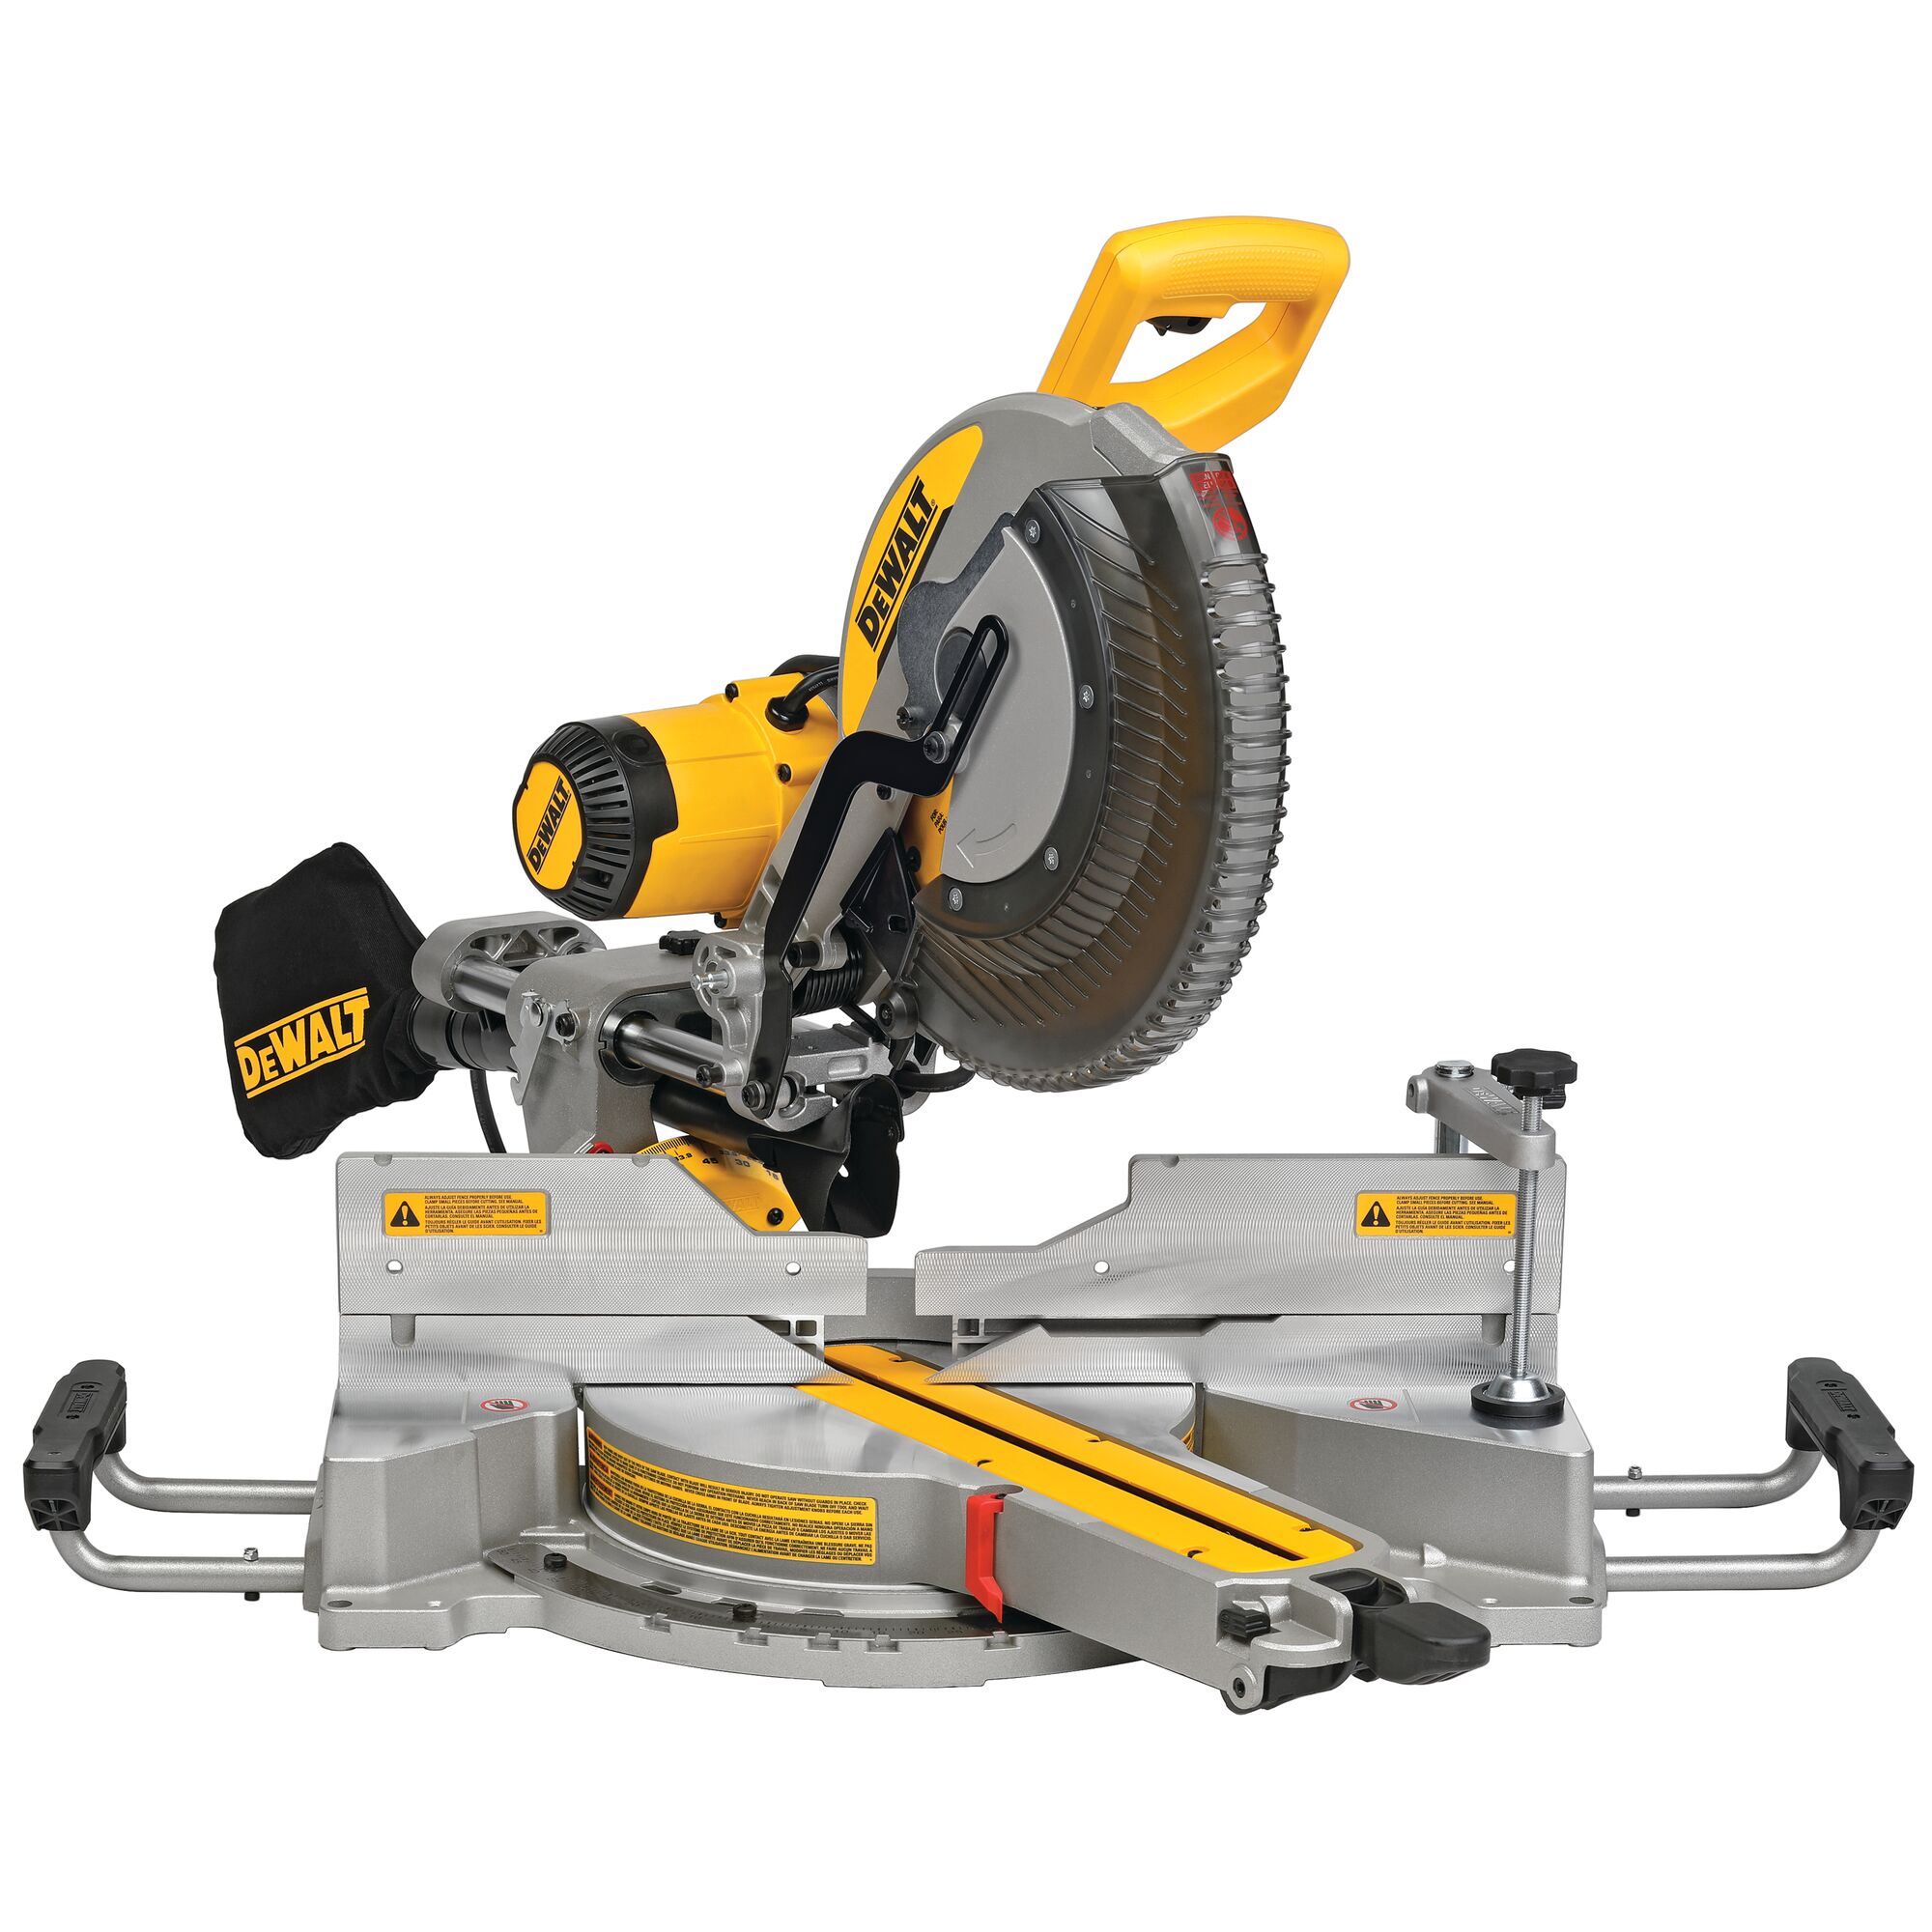 12 in. Double Bevel Miter Saw |